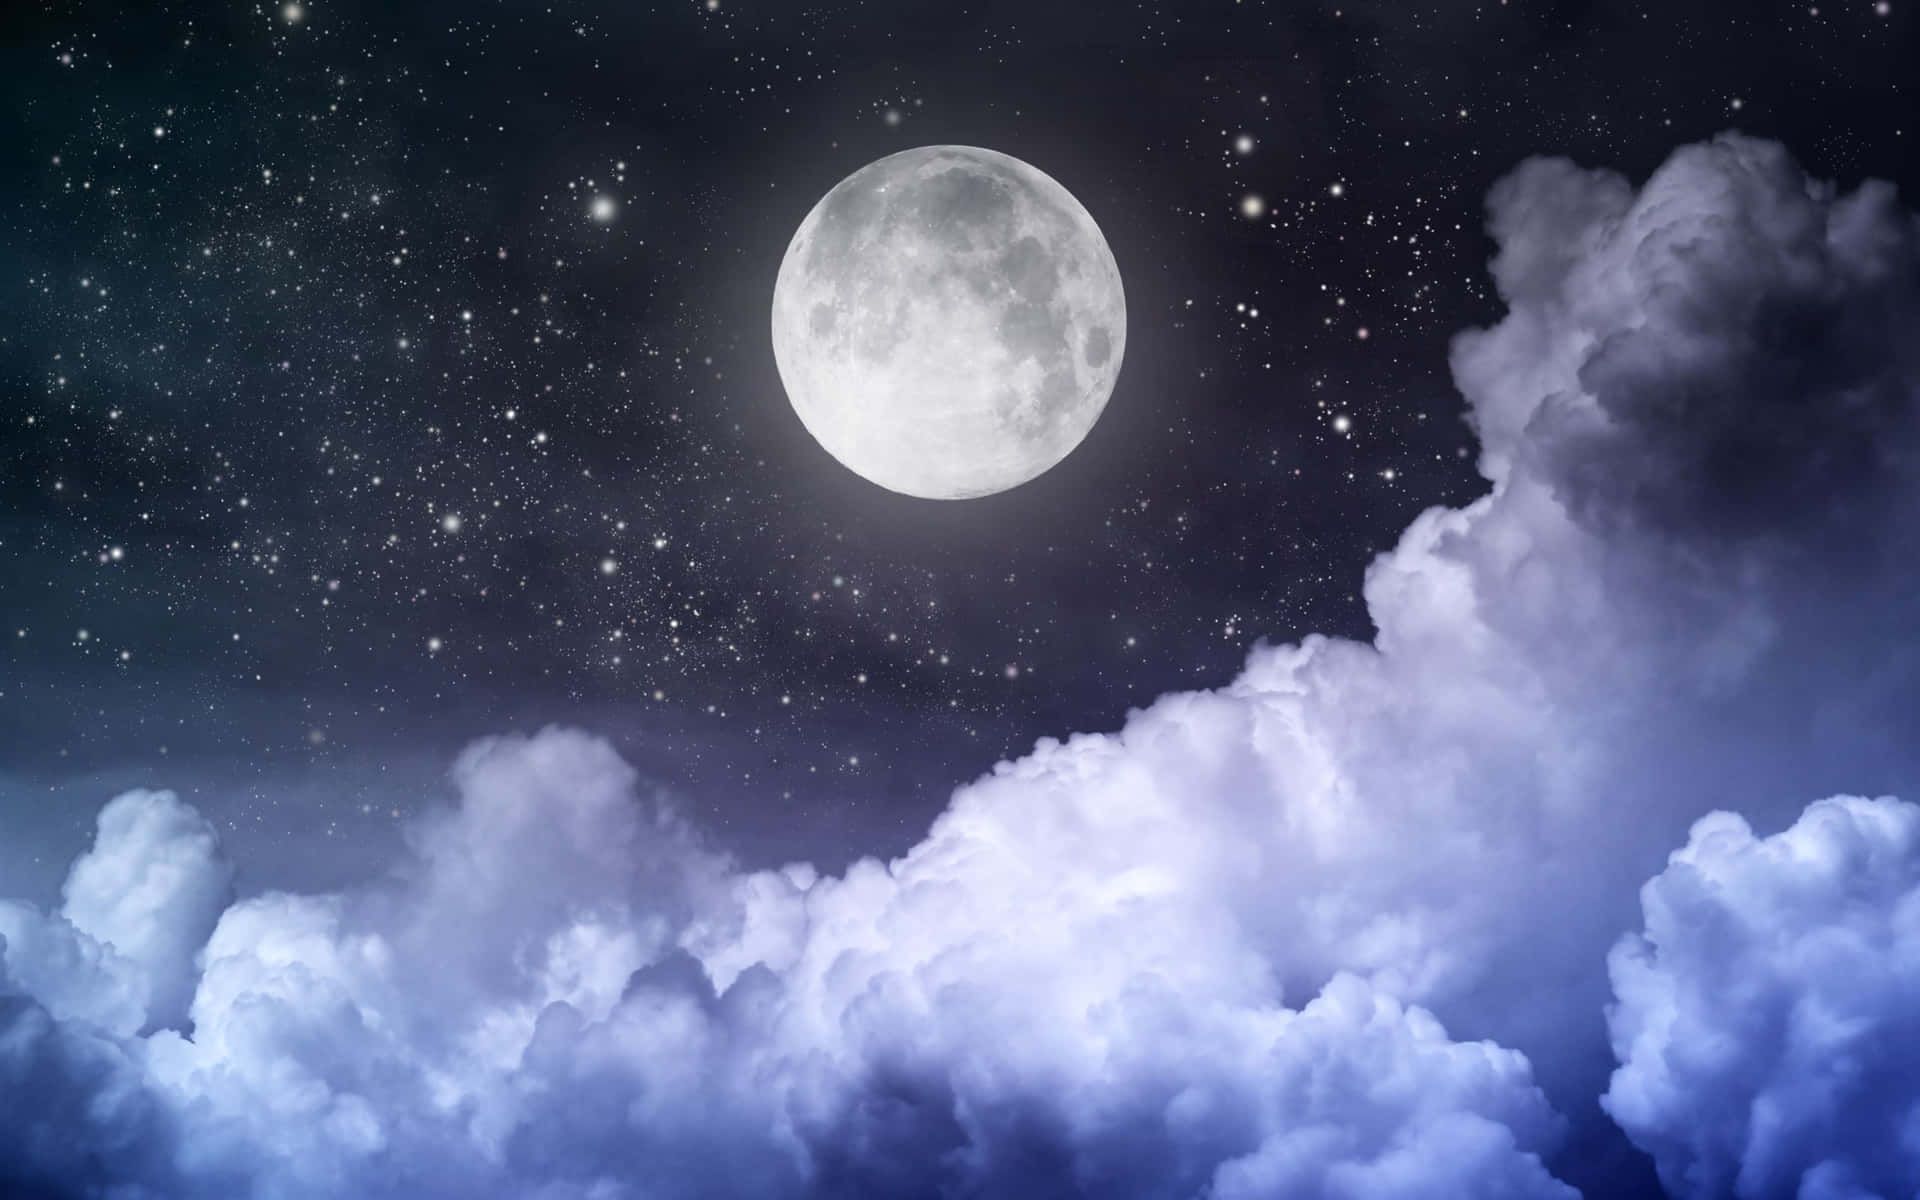 Soar to the Heights of Imagination with this Cute Moon Wallpaper